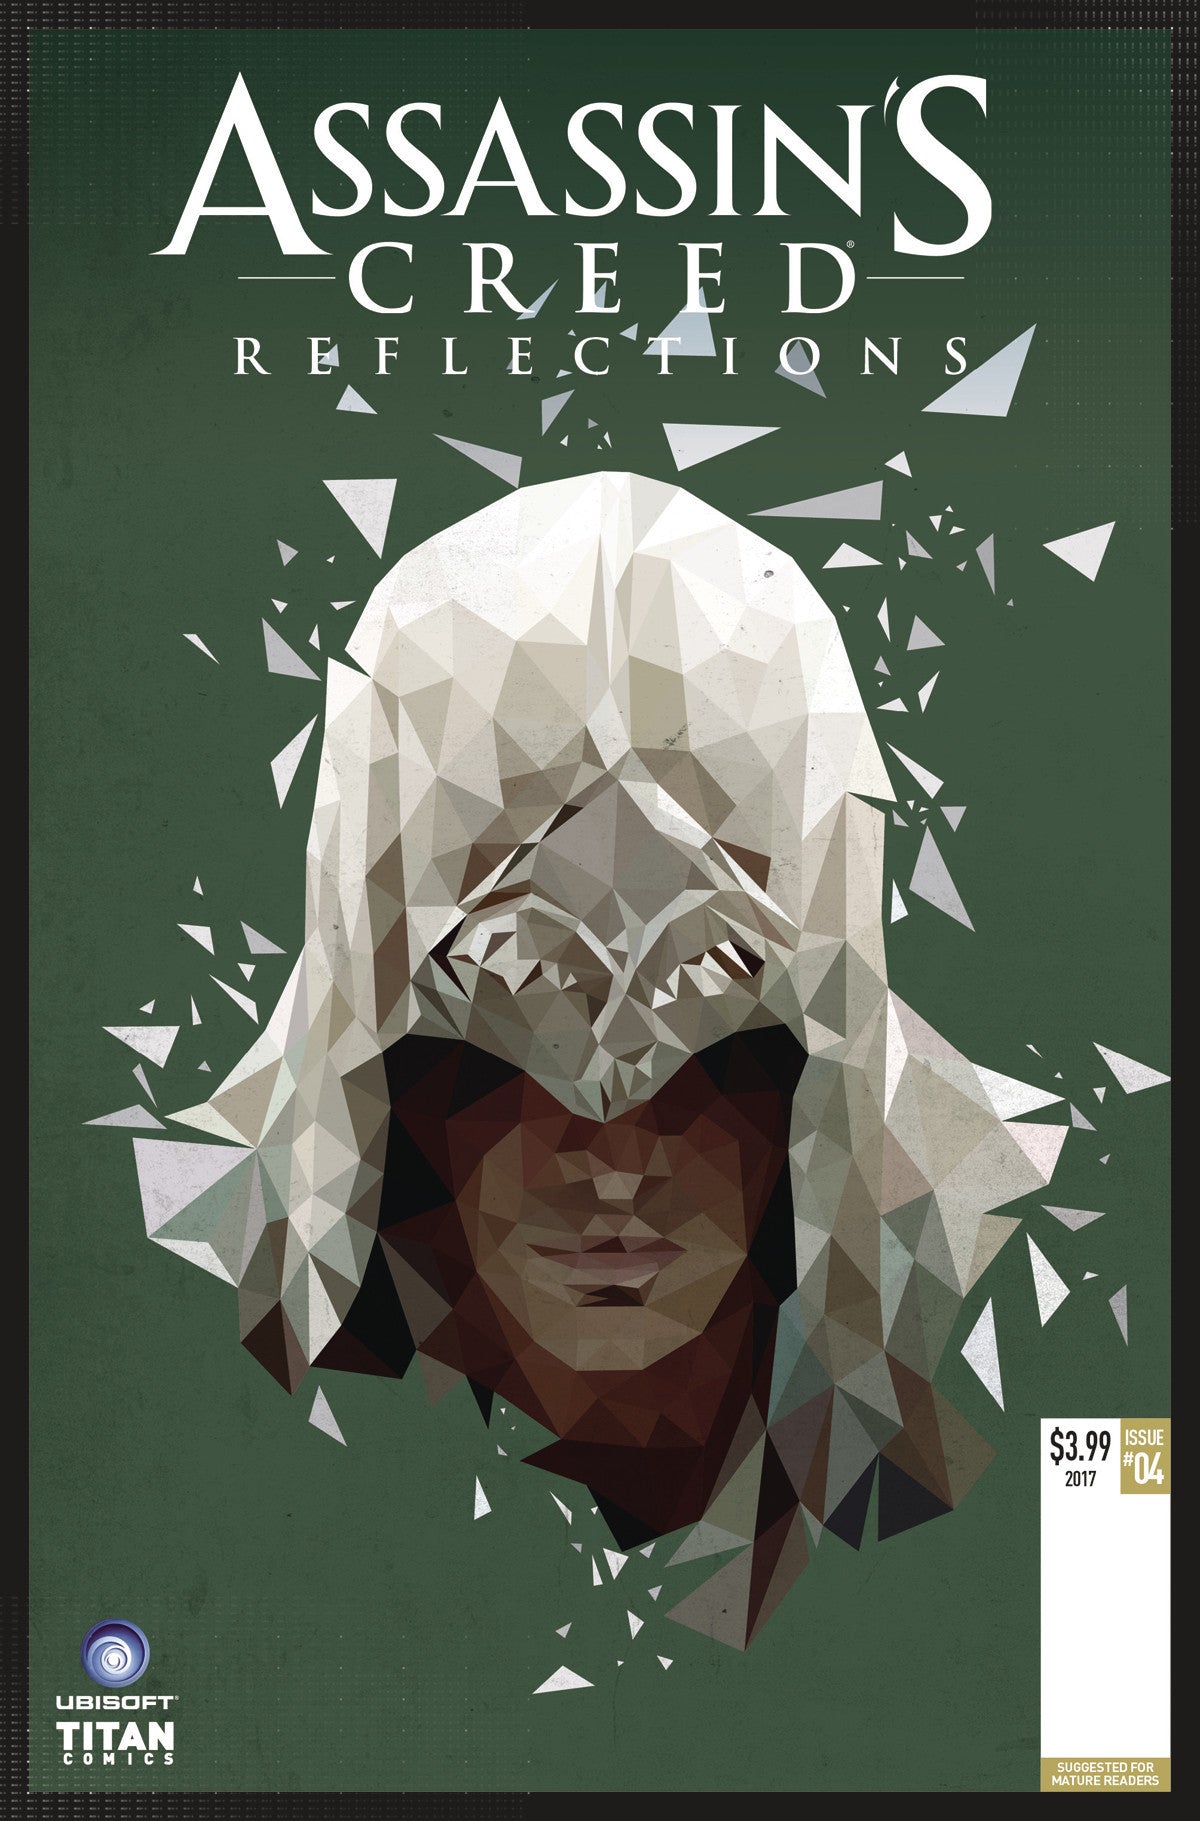 ASSASSINS CREED REFLECTIONS #4 (OF 4) CVR C POLYGON (MR) COVER